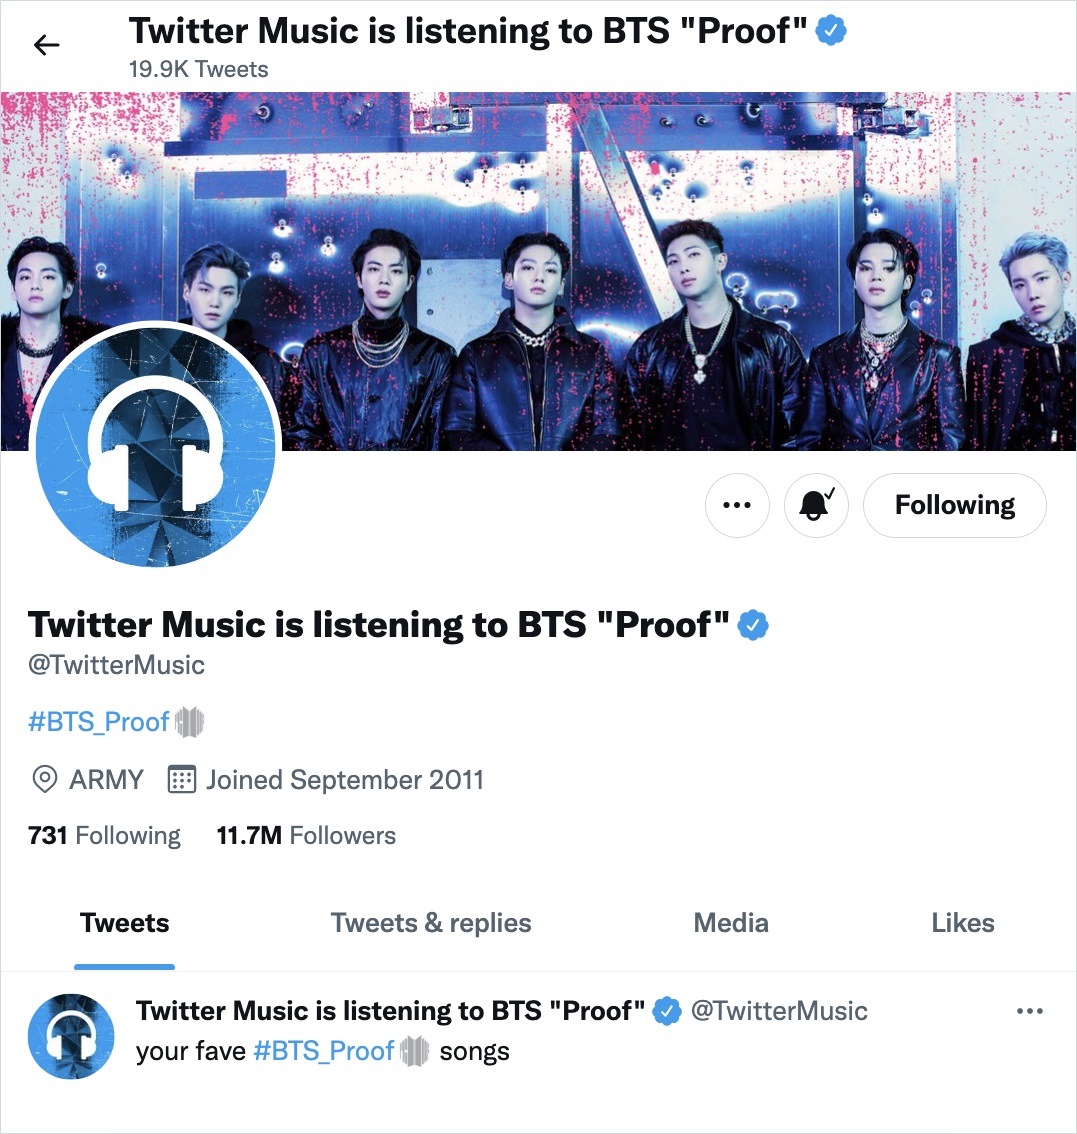 A screenshot of BTS Proof taking over @TwitterMusic